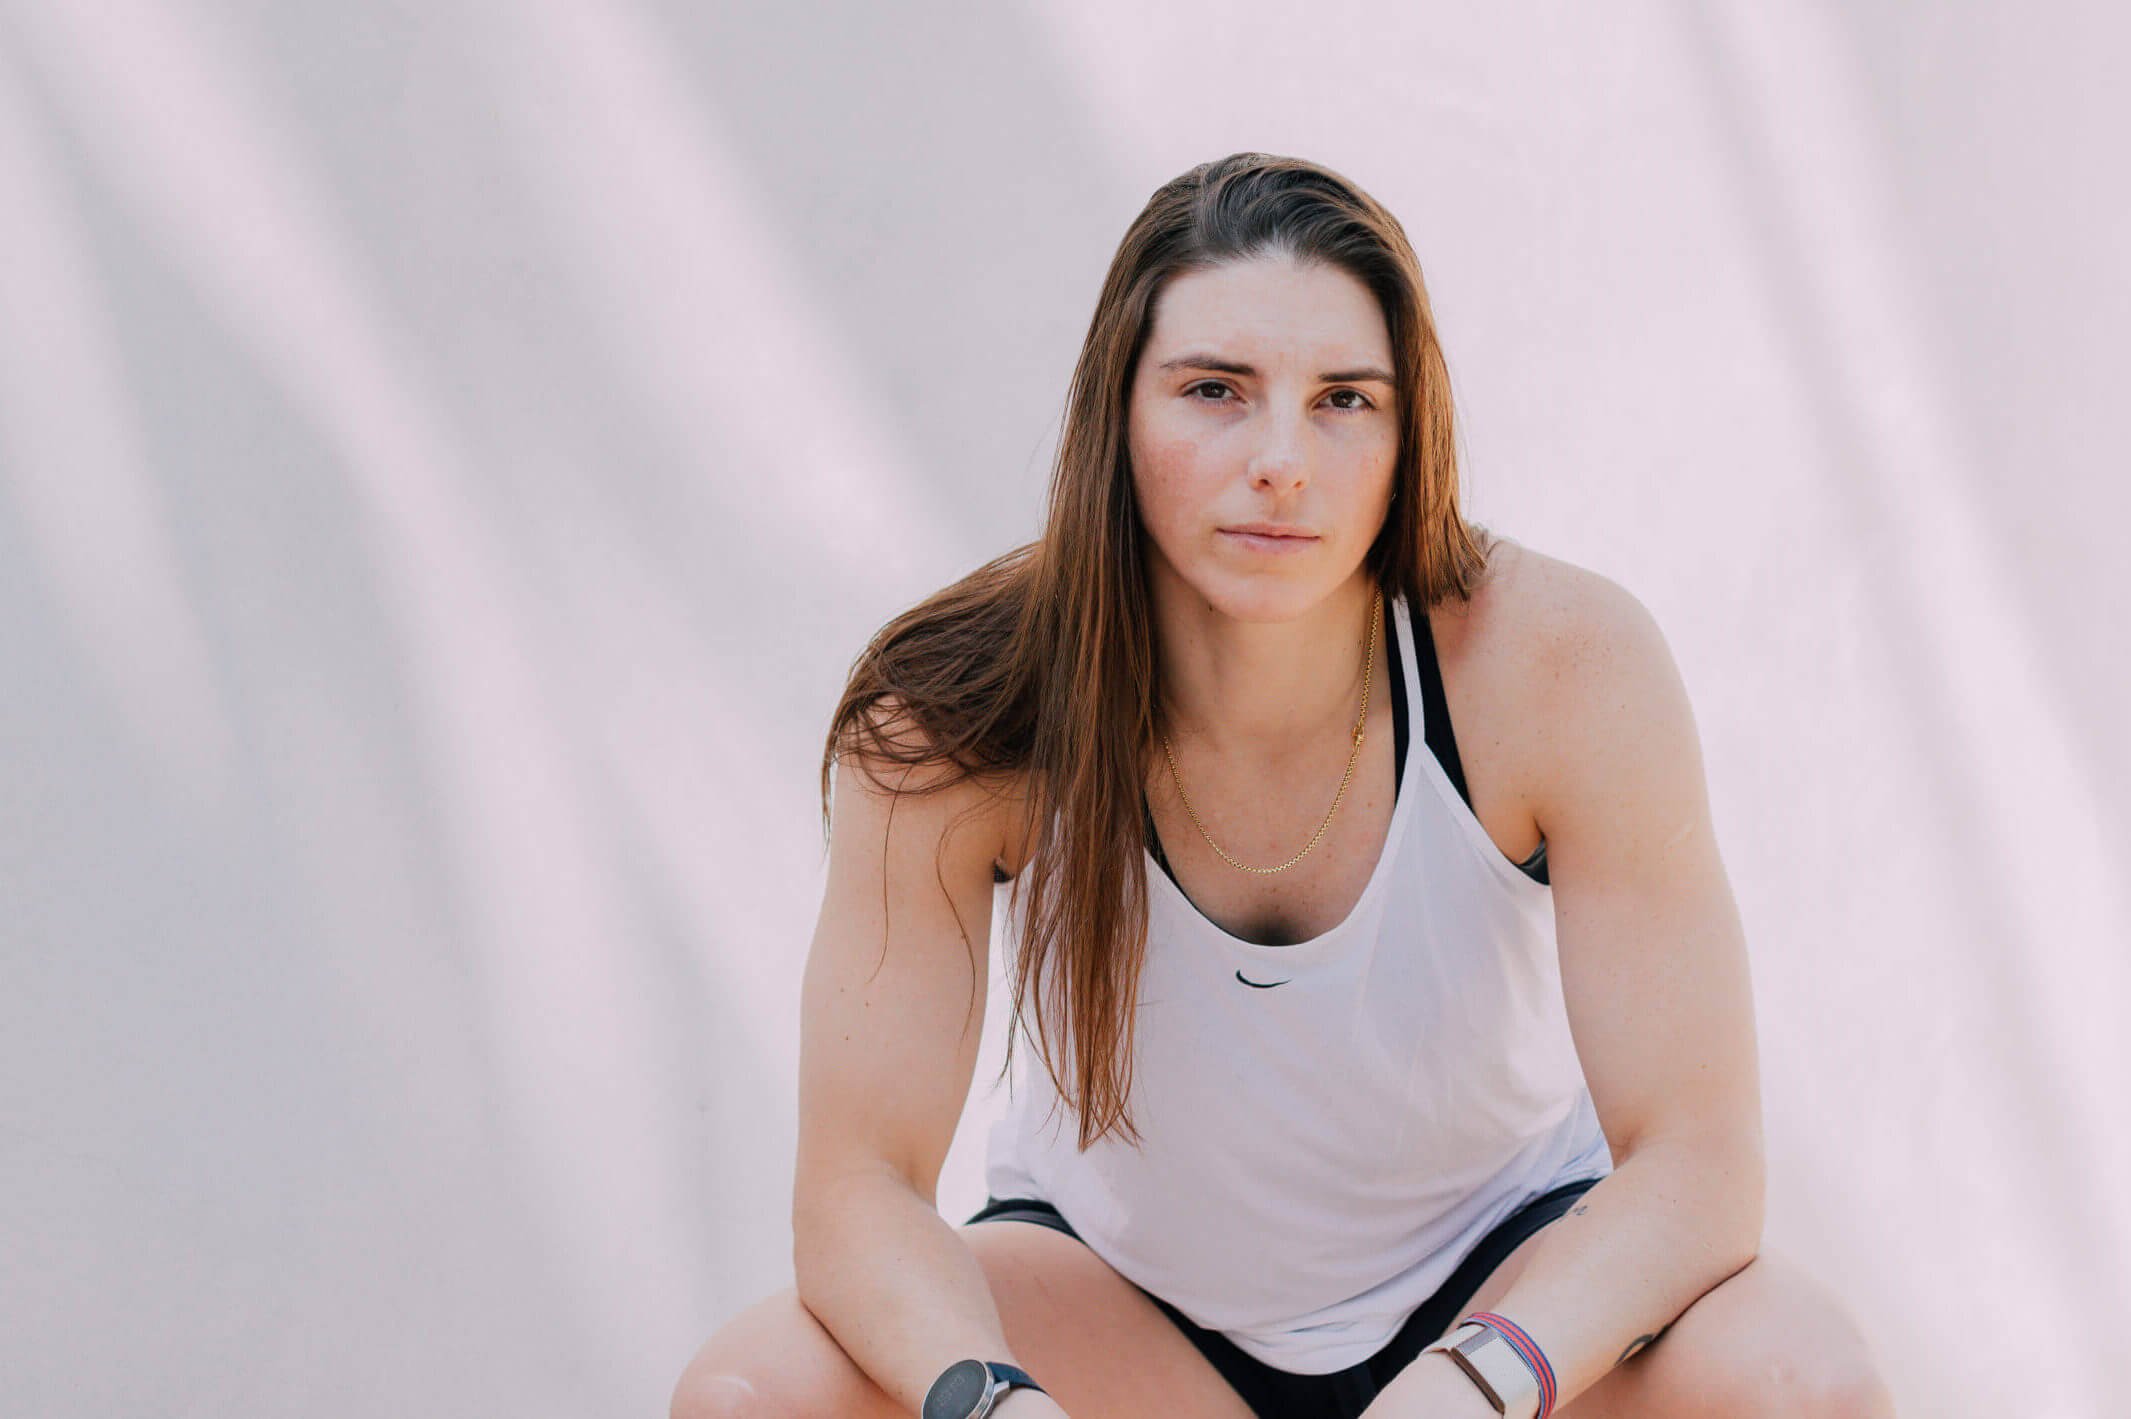 Hilary Knight takes control Her identity, her dreams and the fight for